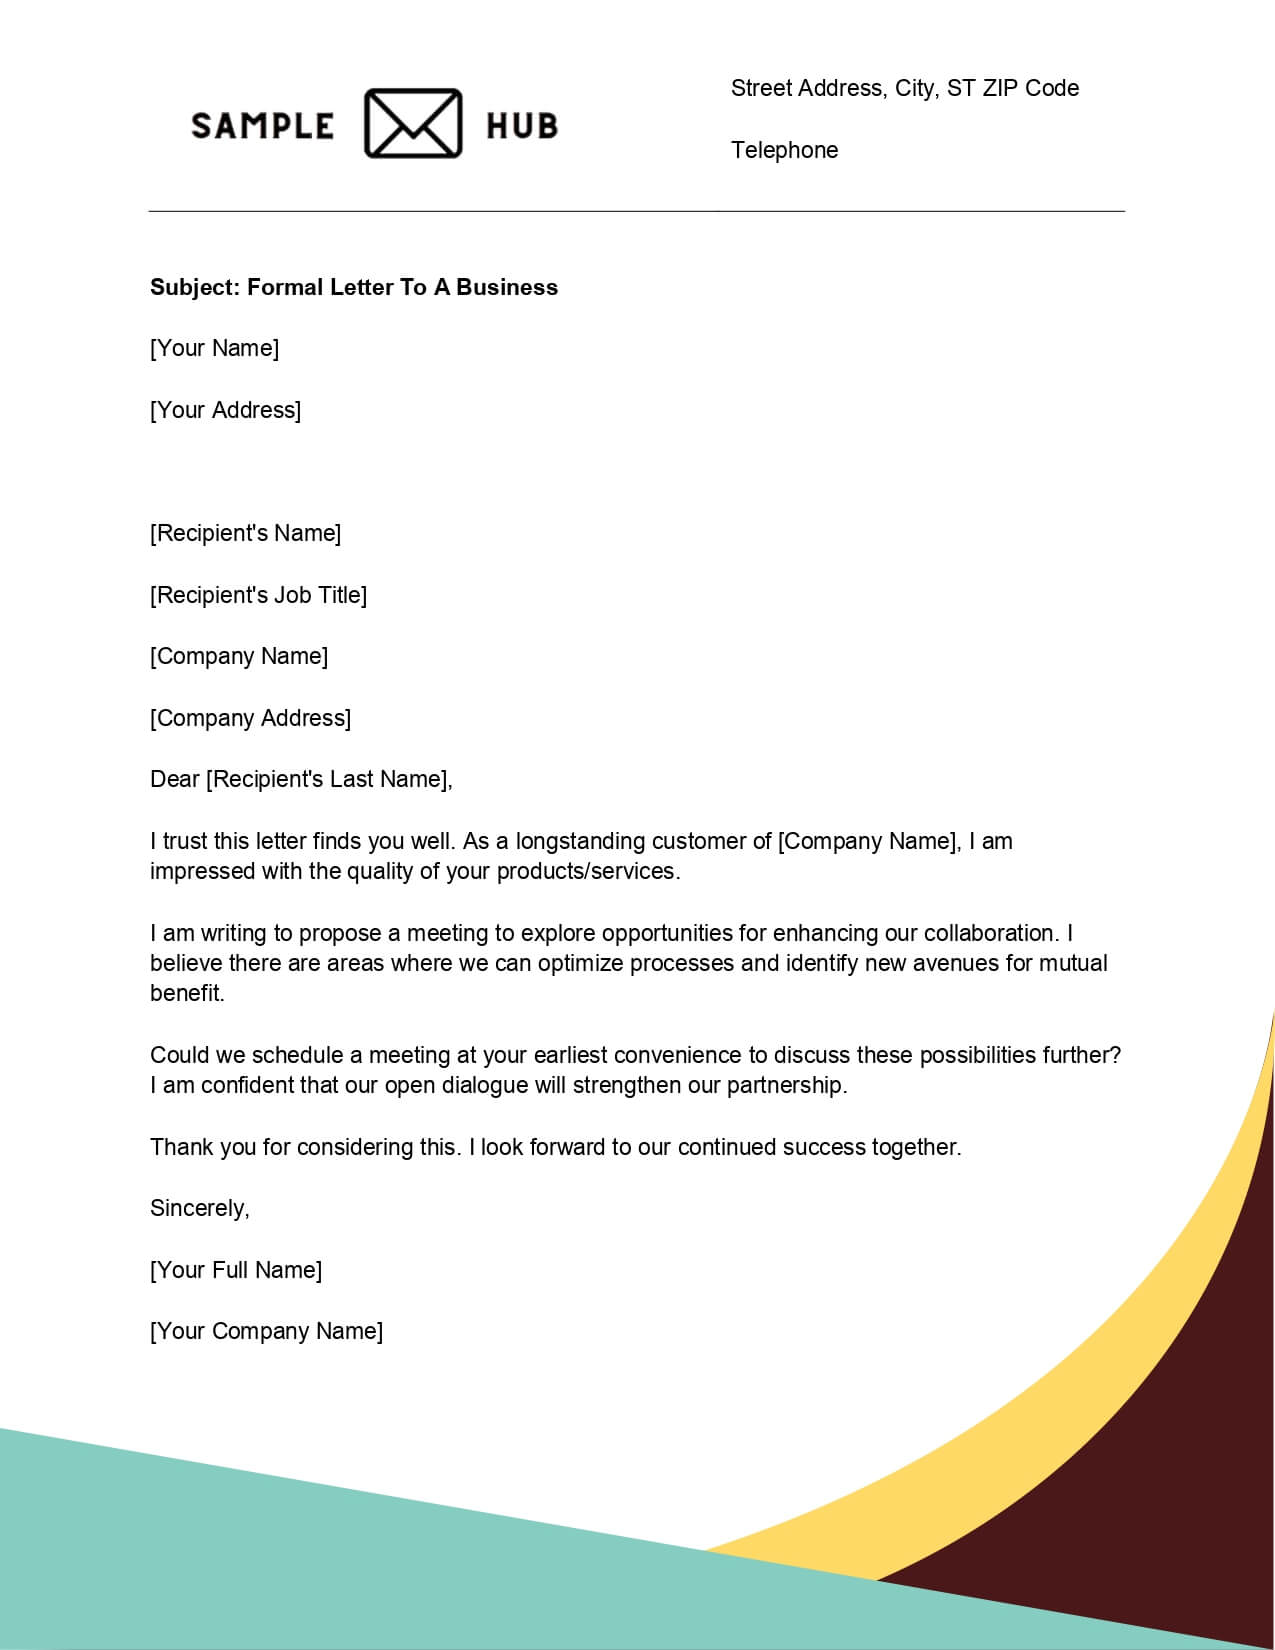 Formal Letter To A Business